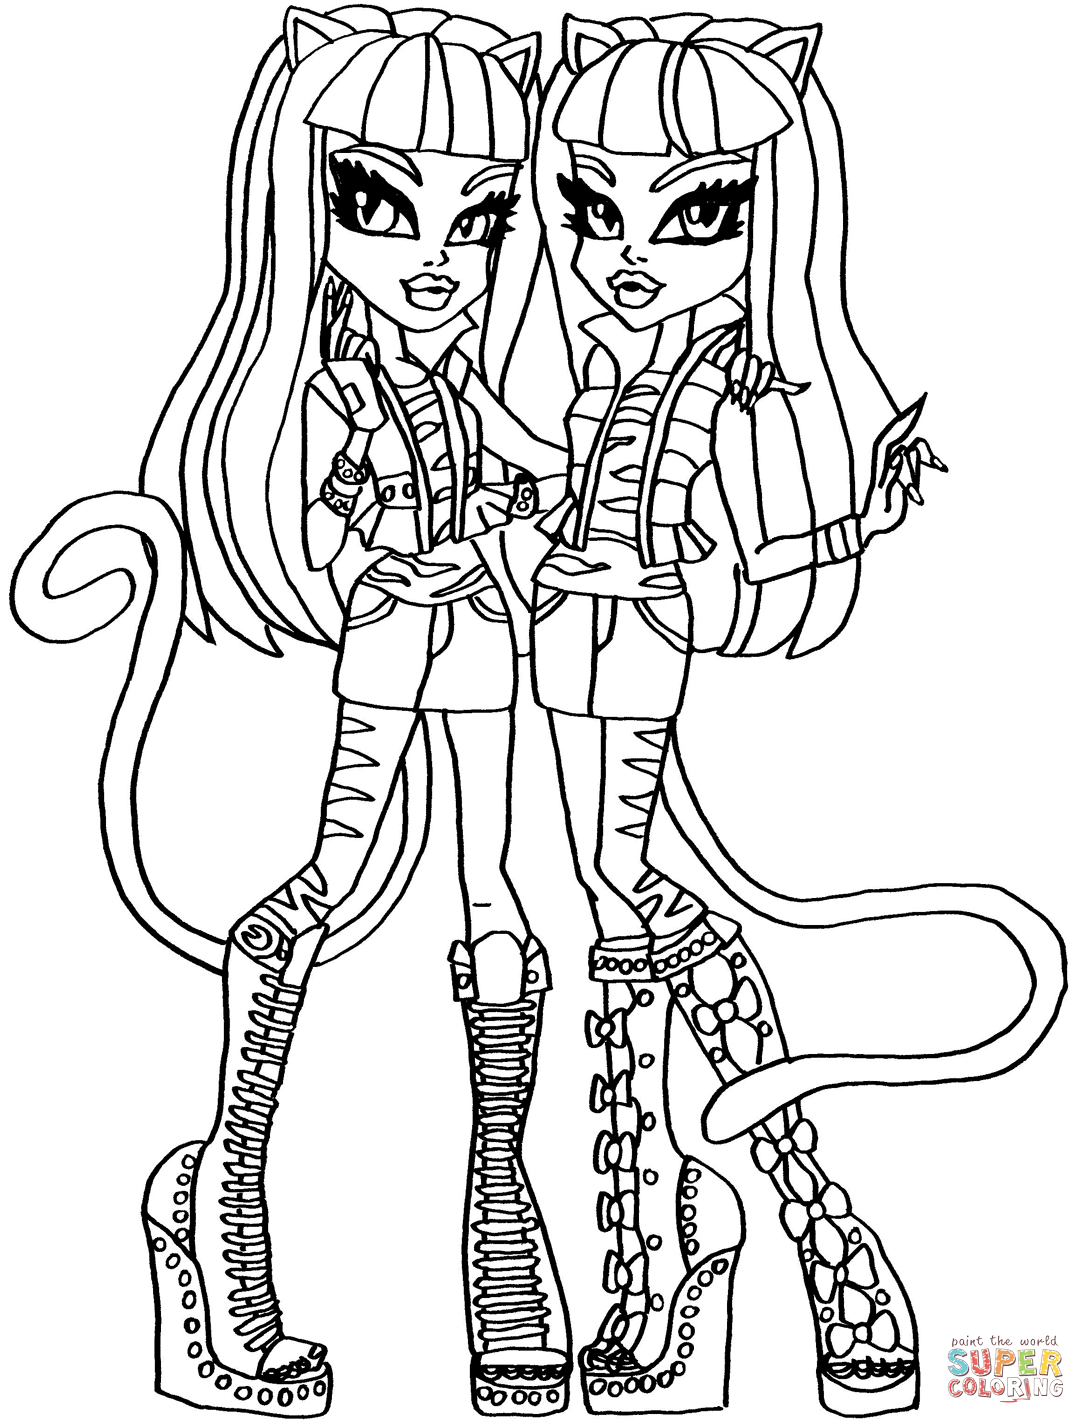 Monster High Coloring Pages Free Printable Coloring Pages Monster High Photo Album Sabadaphnecottage